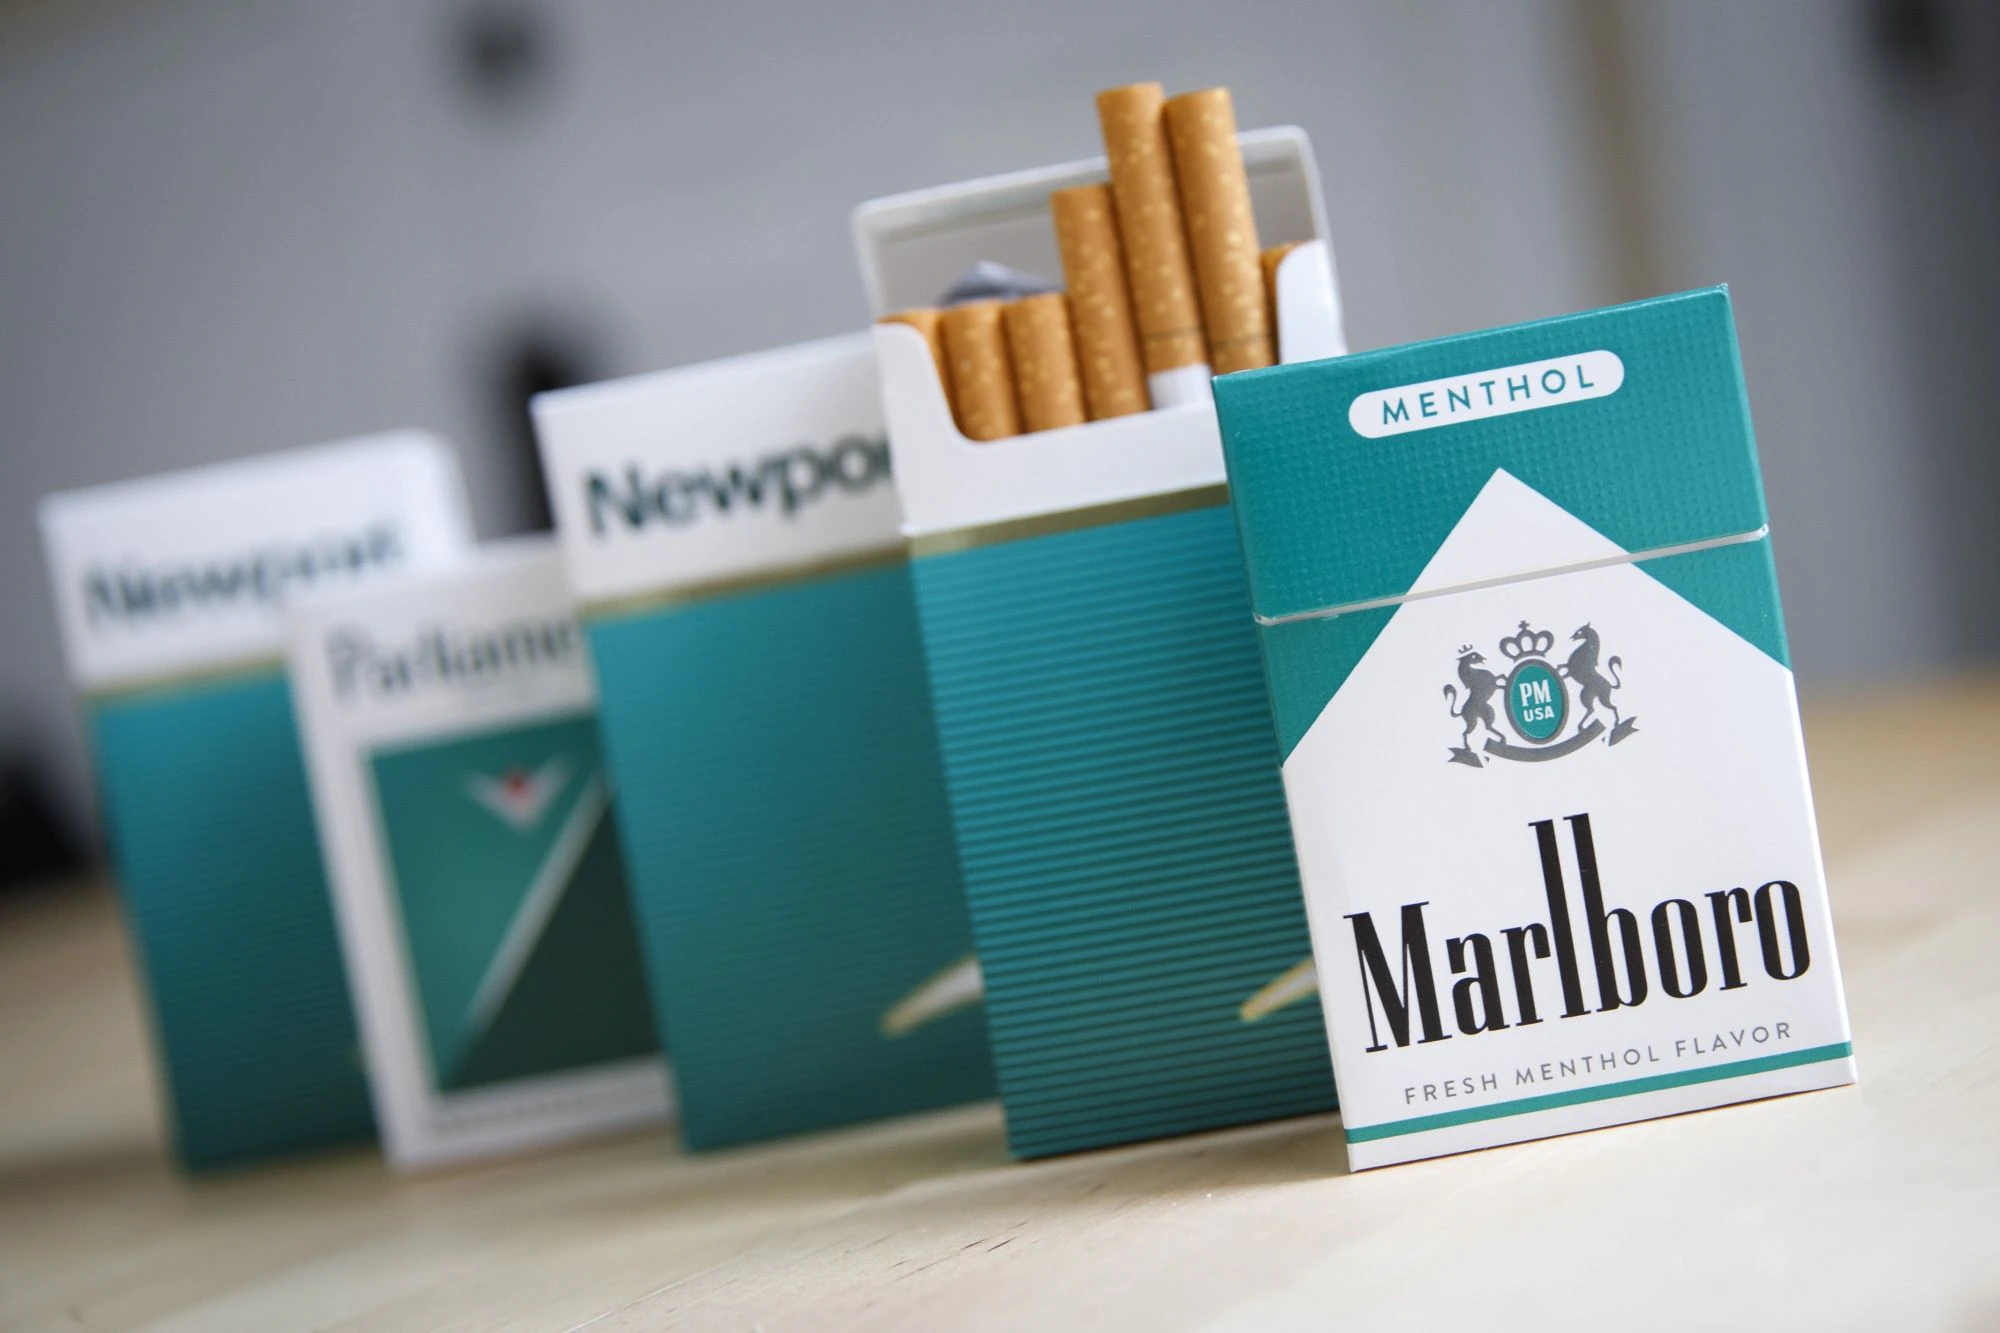 Rules proposed to ban menthol cigarettes by authorities